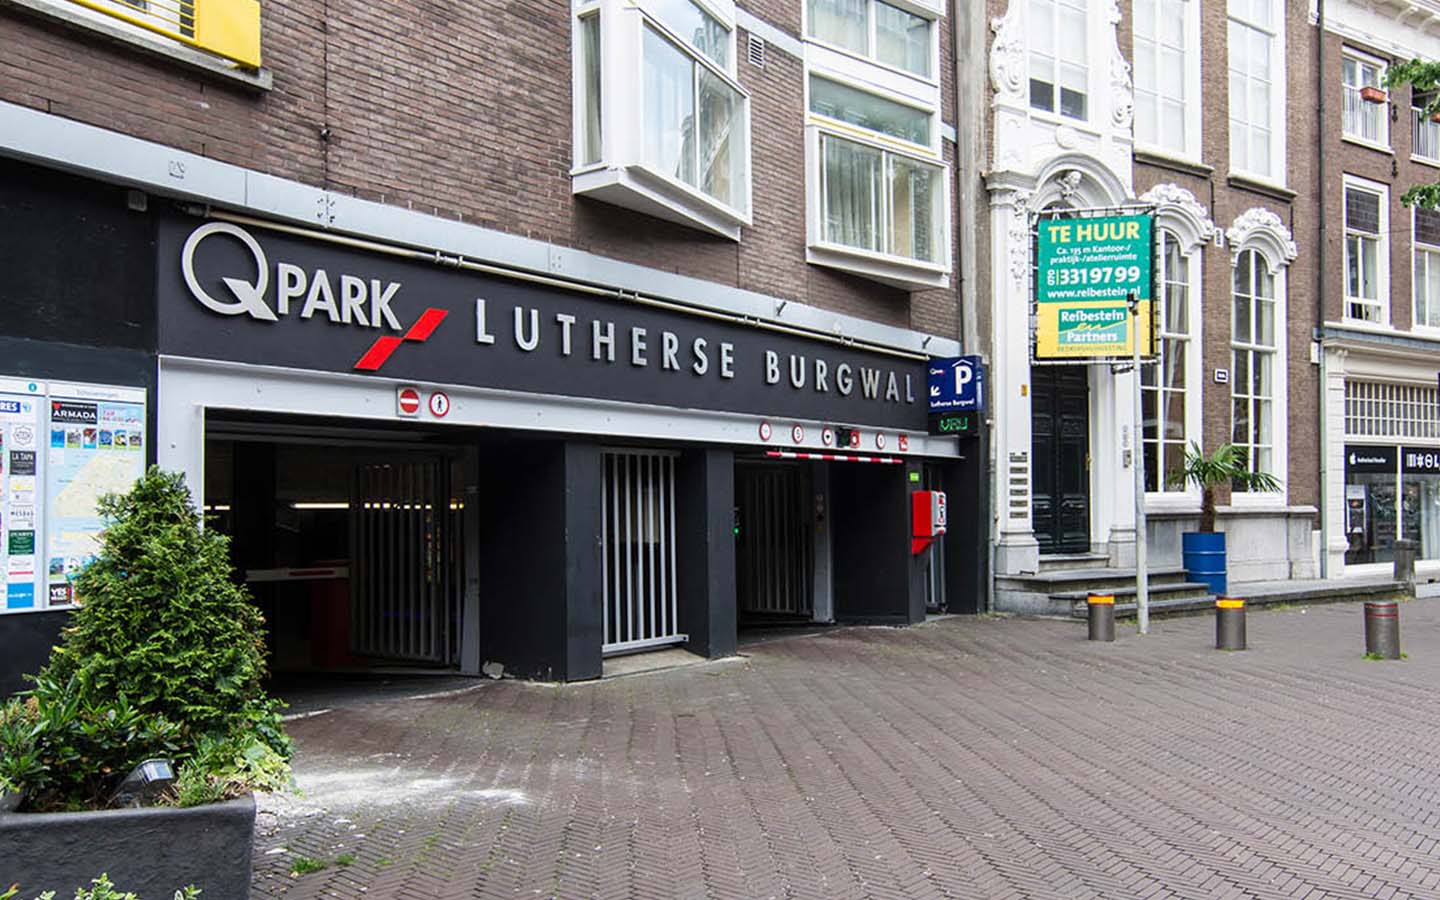 Parking Q-Park Lutherse Burgwal